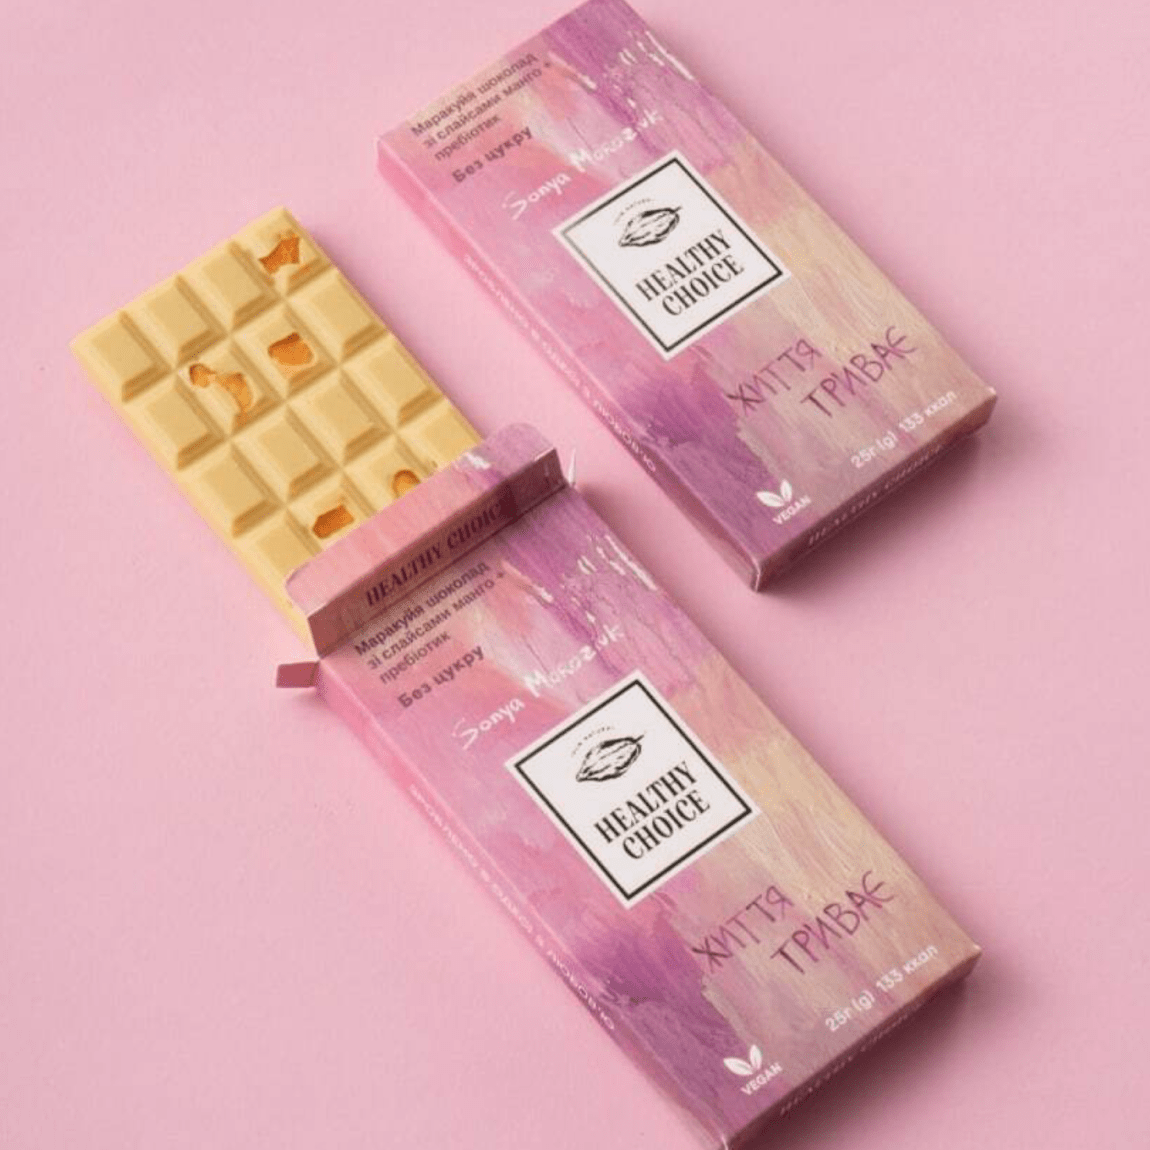 Chocolate with passion fruit and mango slices - Beauty Matters